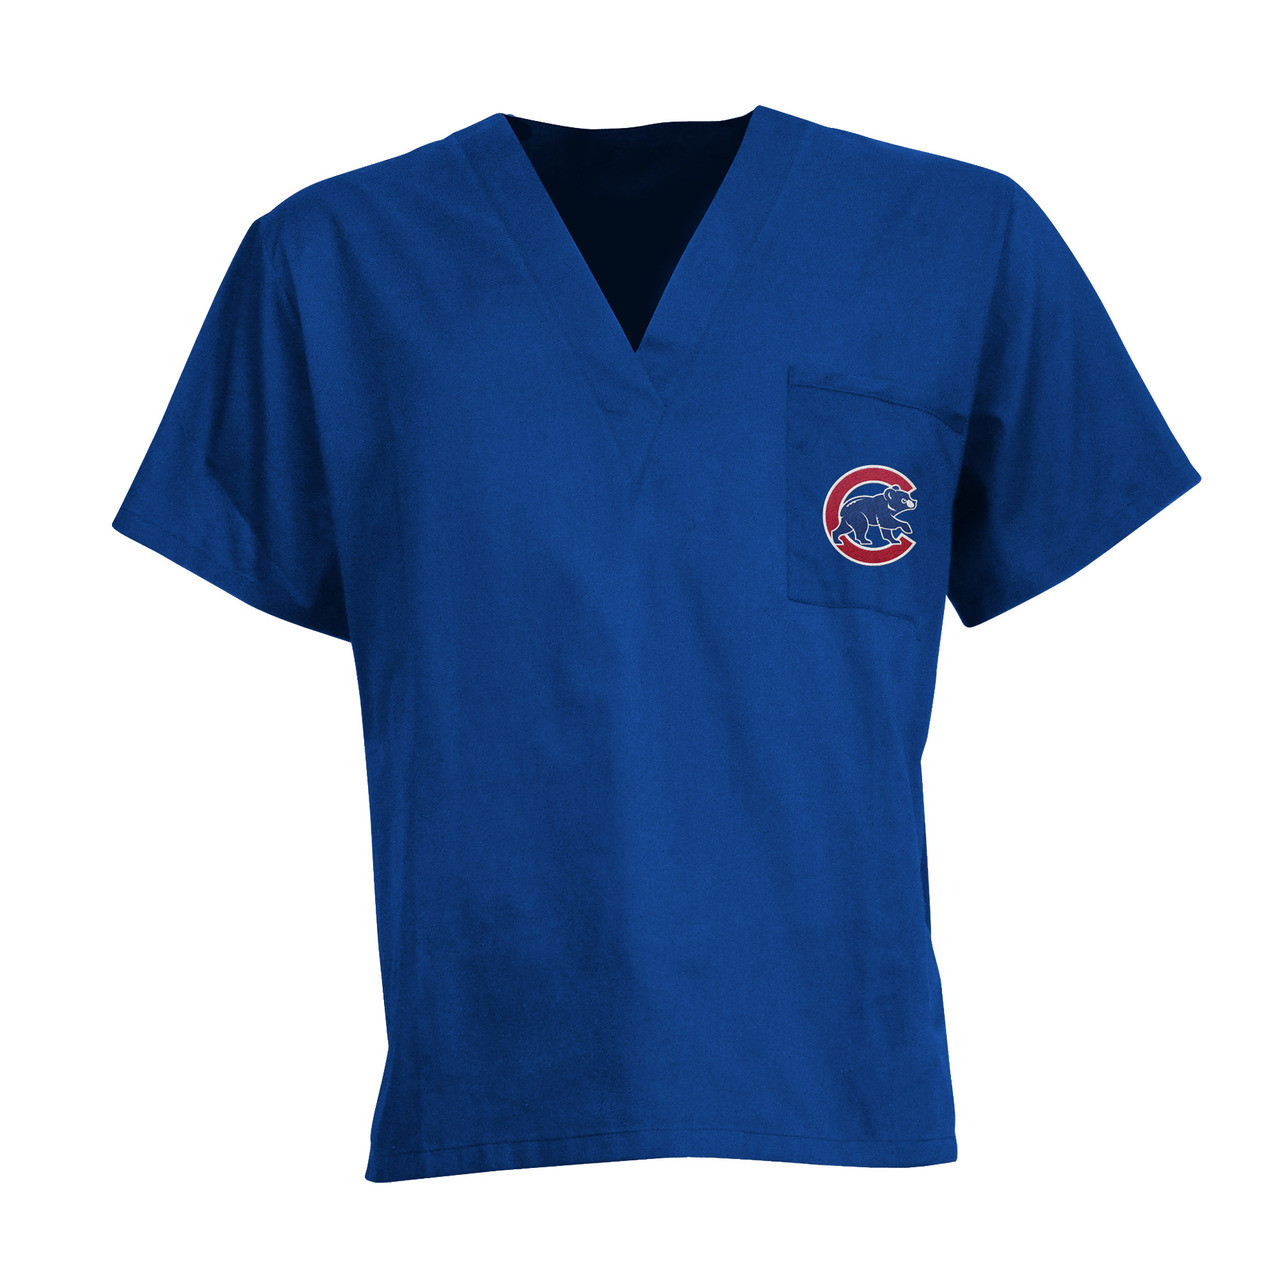 Women's Red Chicago Cubs Plus Sizes Primary Team Logo T-Shirt